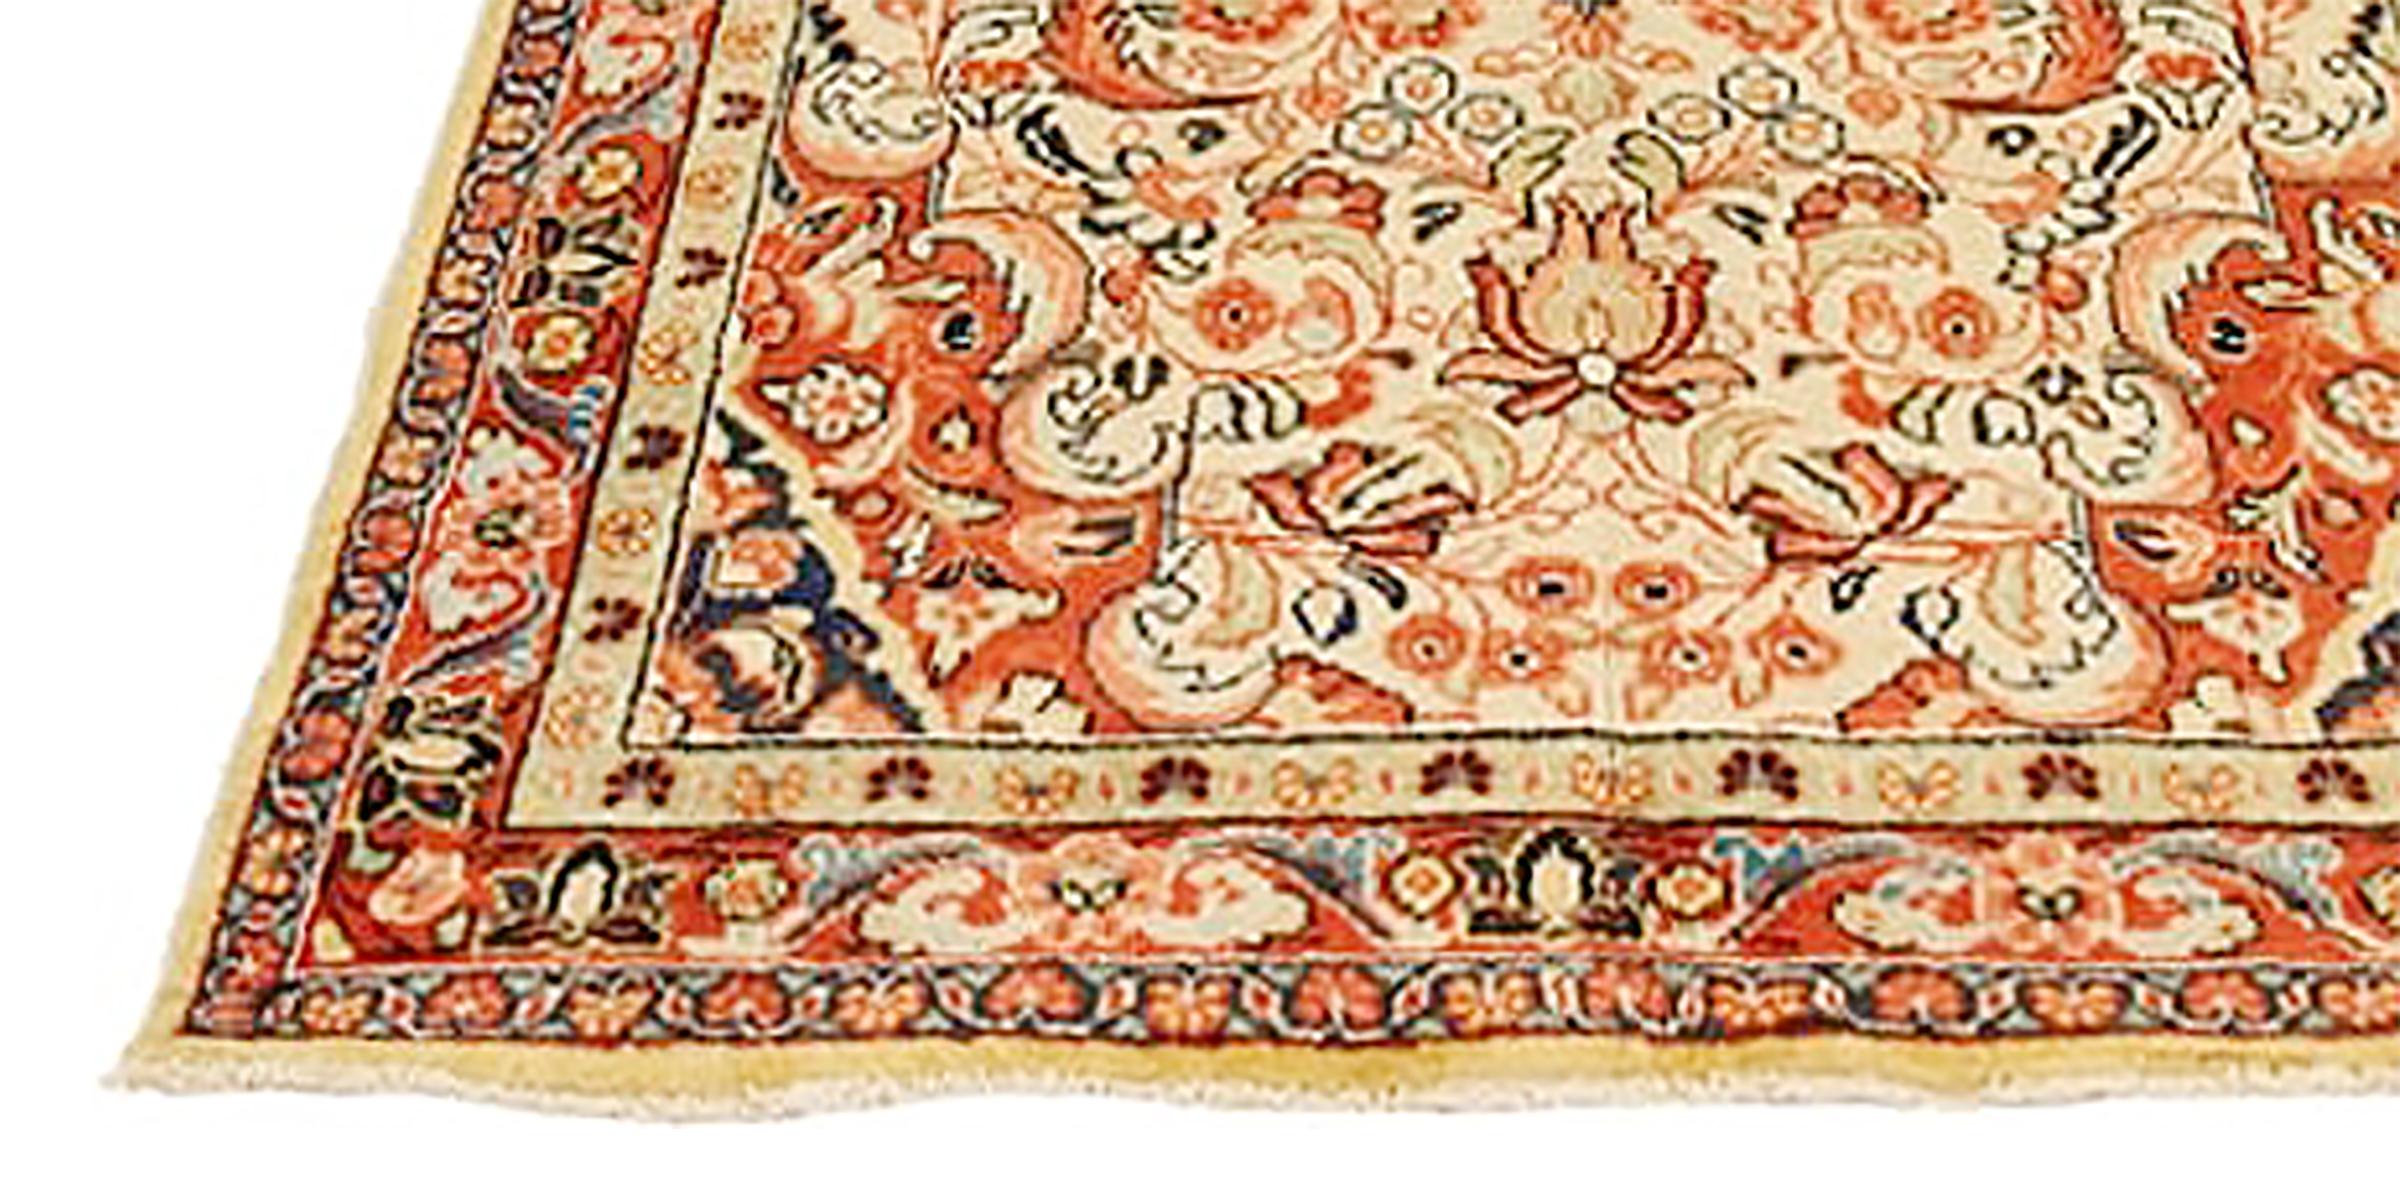 Hand-Woven Antique Persian Mahal Rug with Beige and Black Floral Details on Ivory Field For Sale